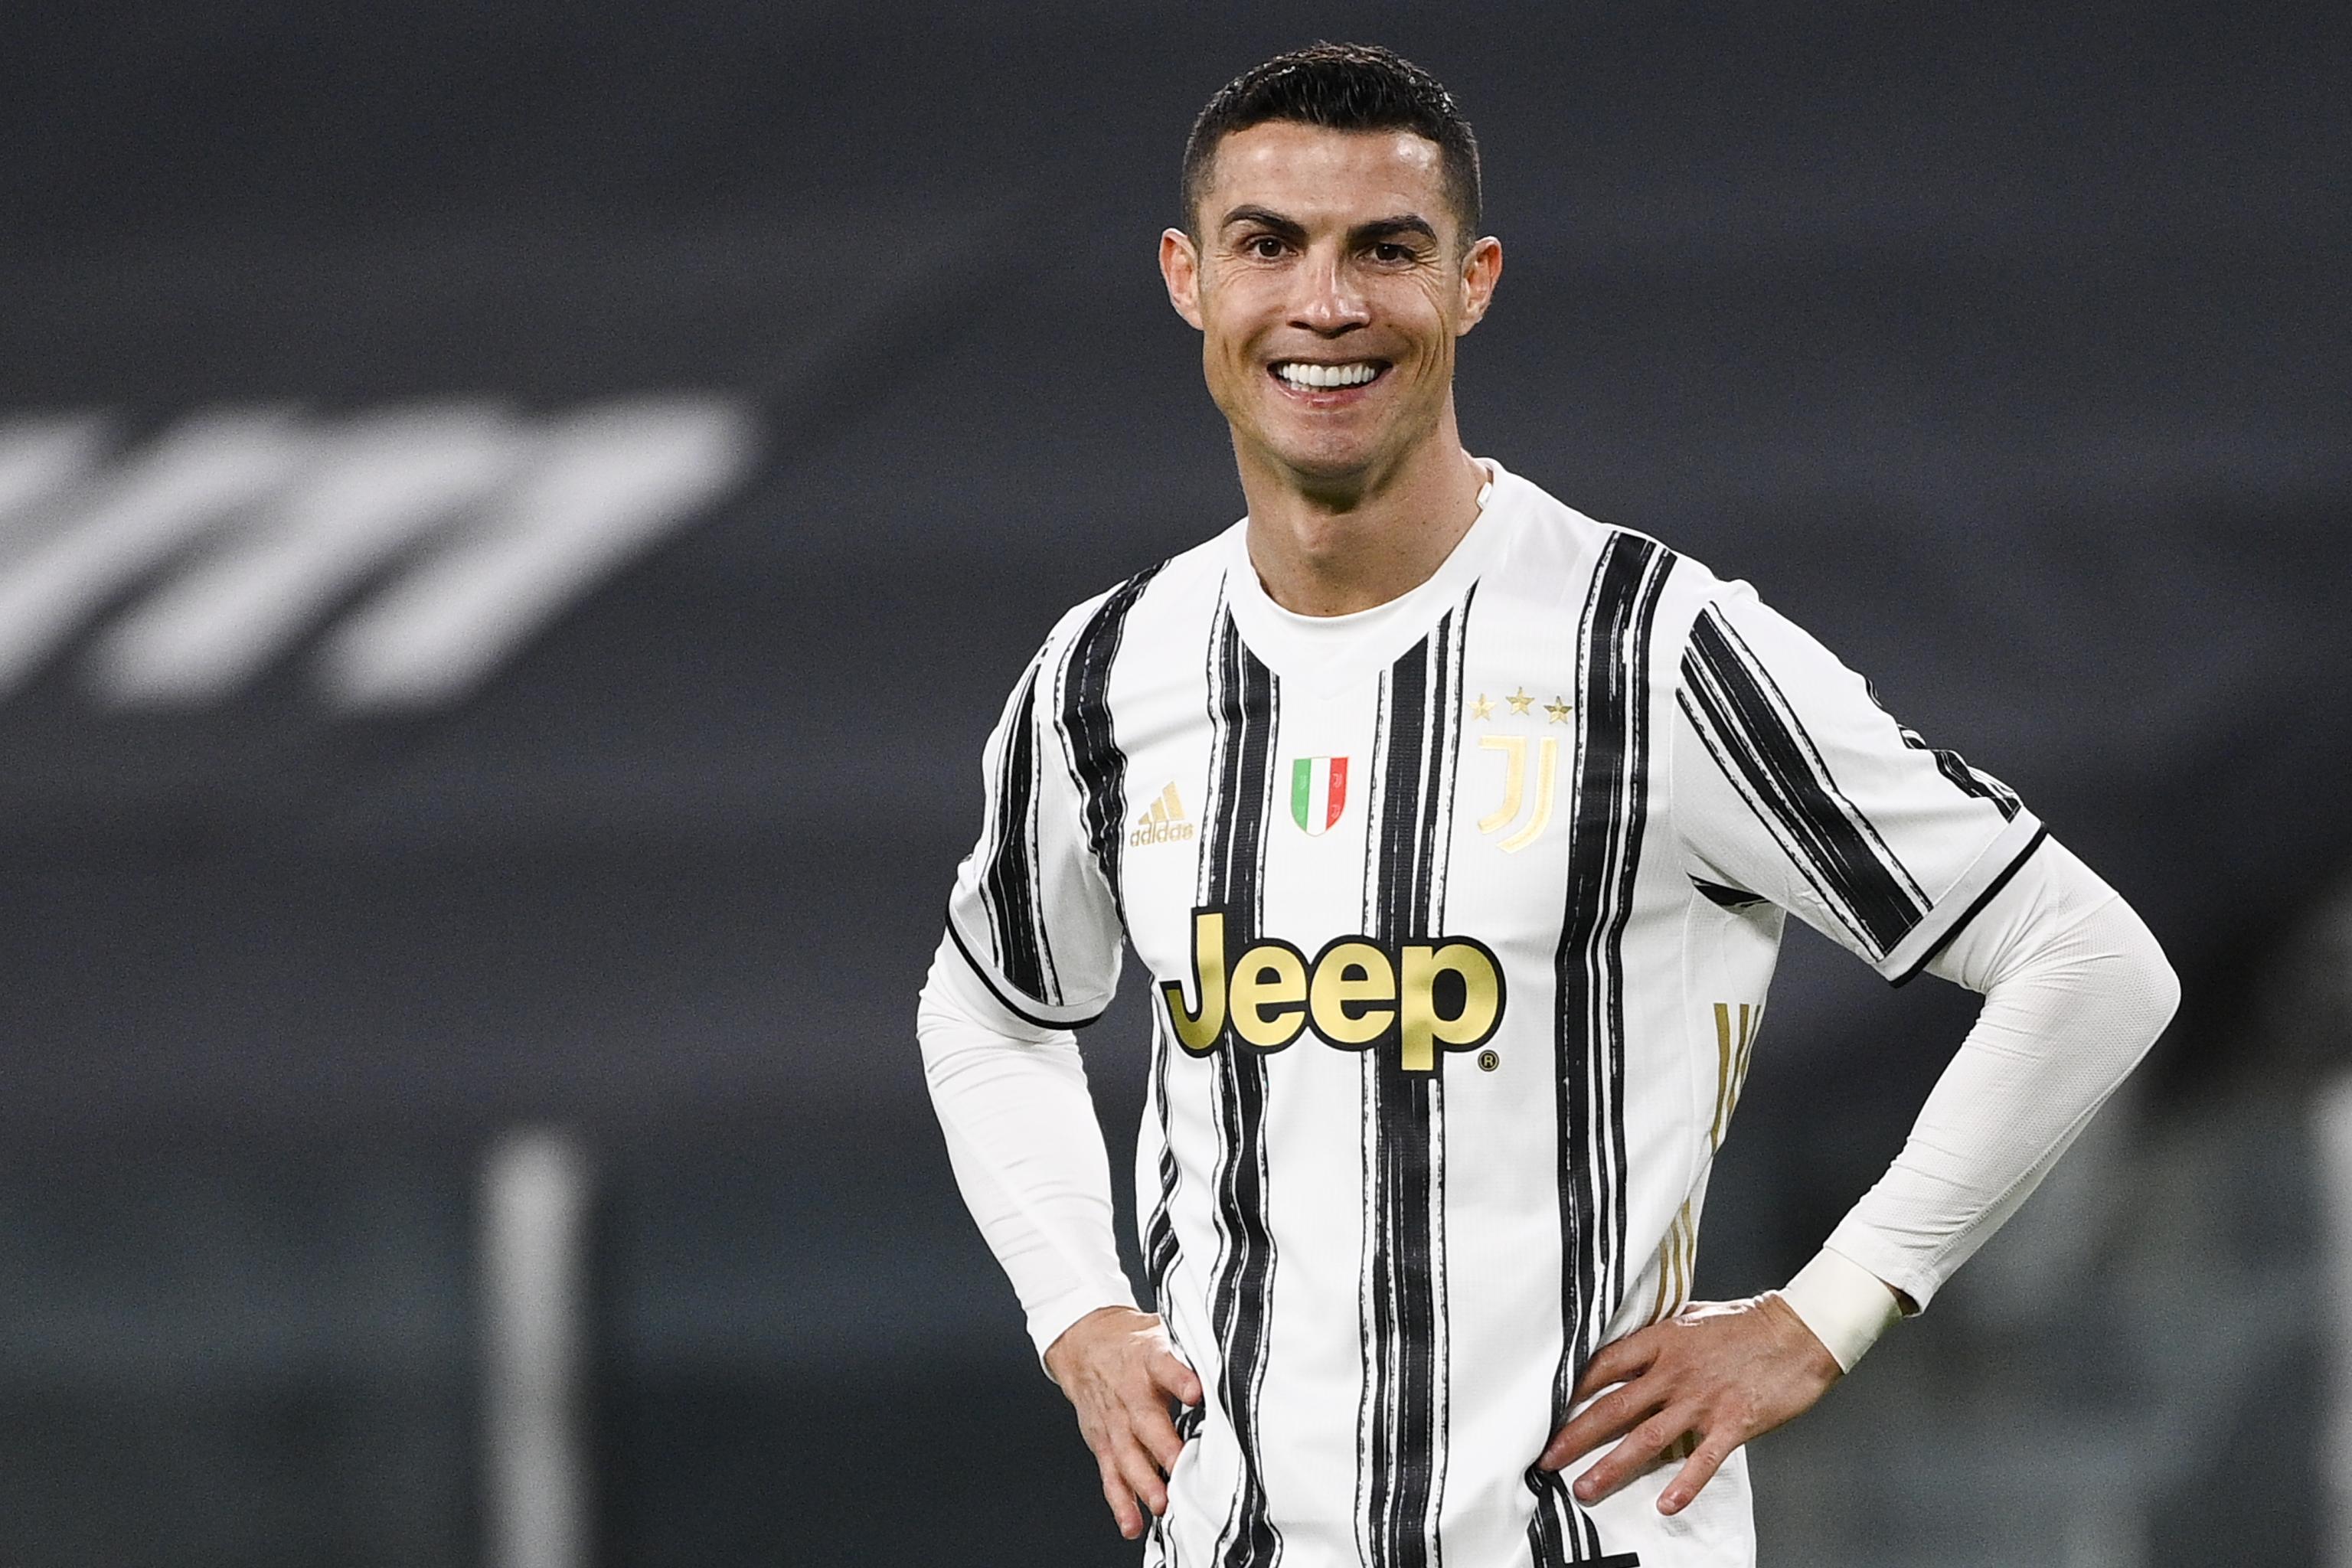 Cristiano Ronaldo hits 500 million Instagram followers after posting ad  featuring Lionel Messi